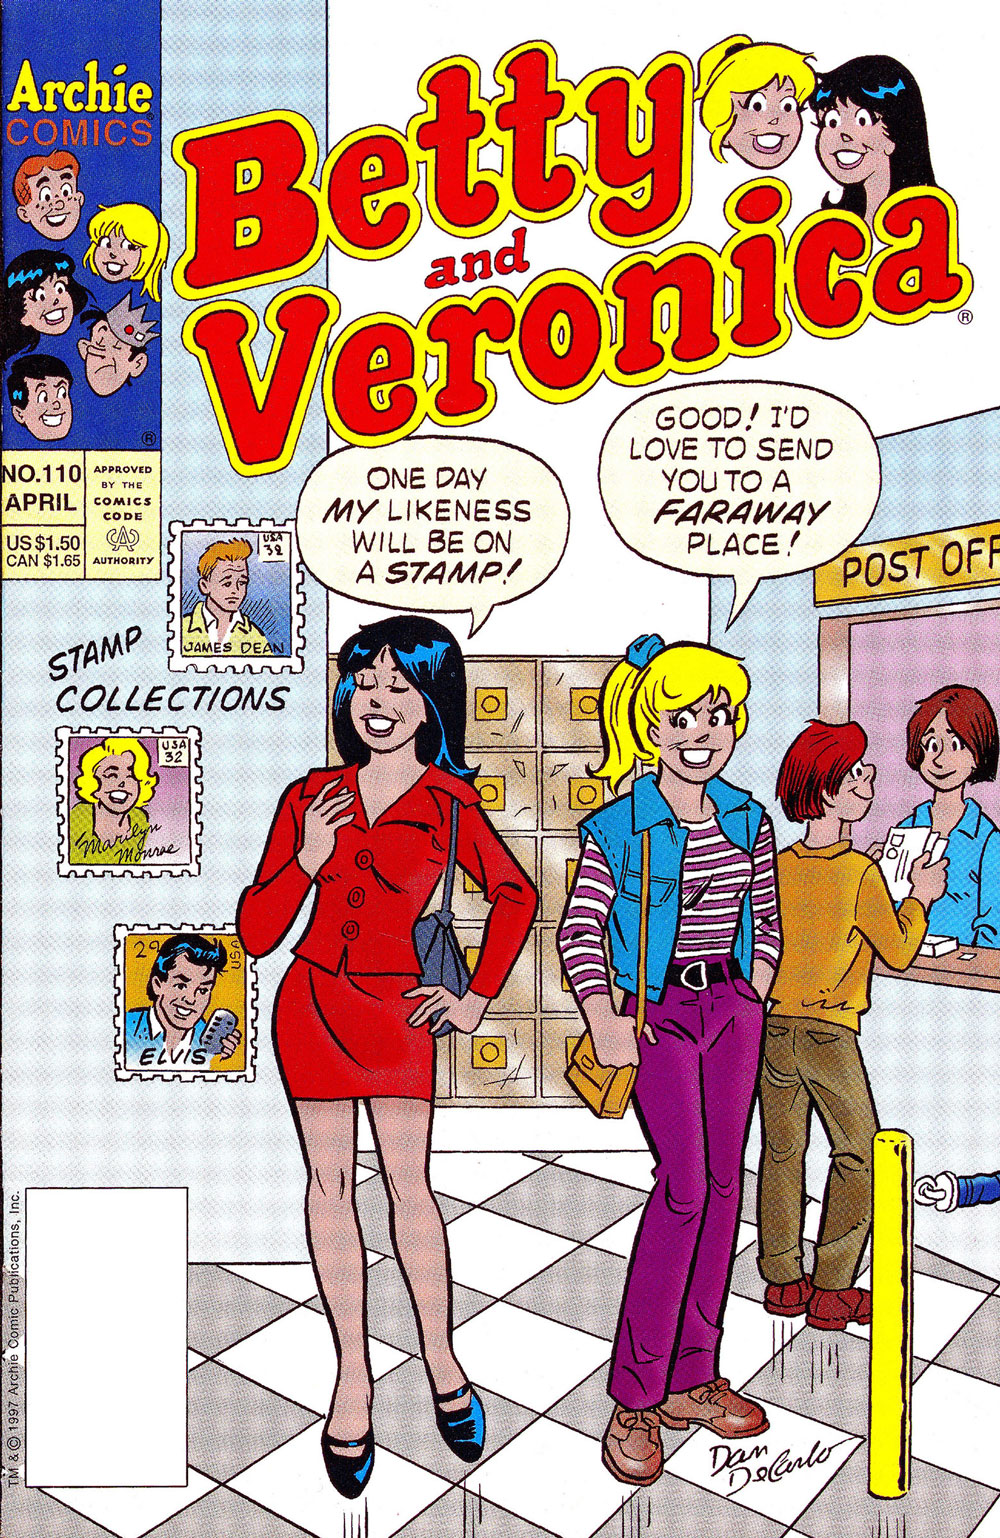 Cover of BETTY AND VERONICA #110. Betty and Veronica are in the post office. Veronica says, "One day my likeness will be on a stamp!" Betty responds, "Good! I'd love to send you to a faraway place!"